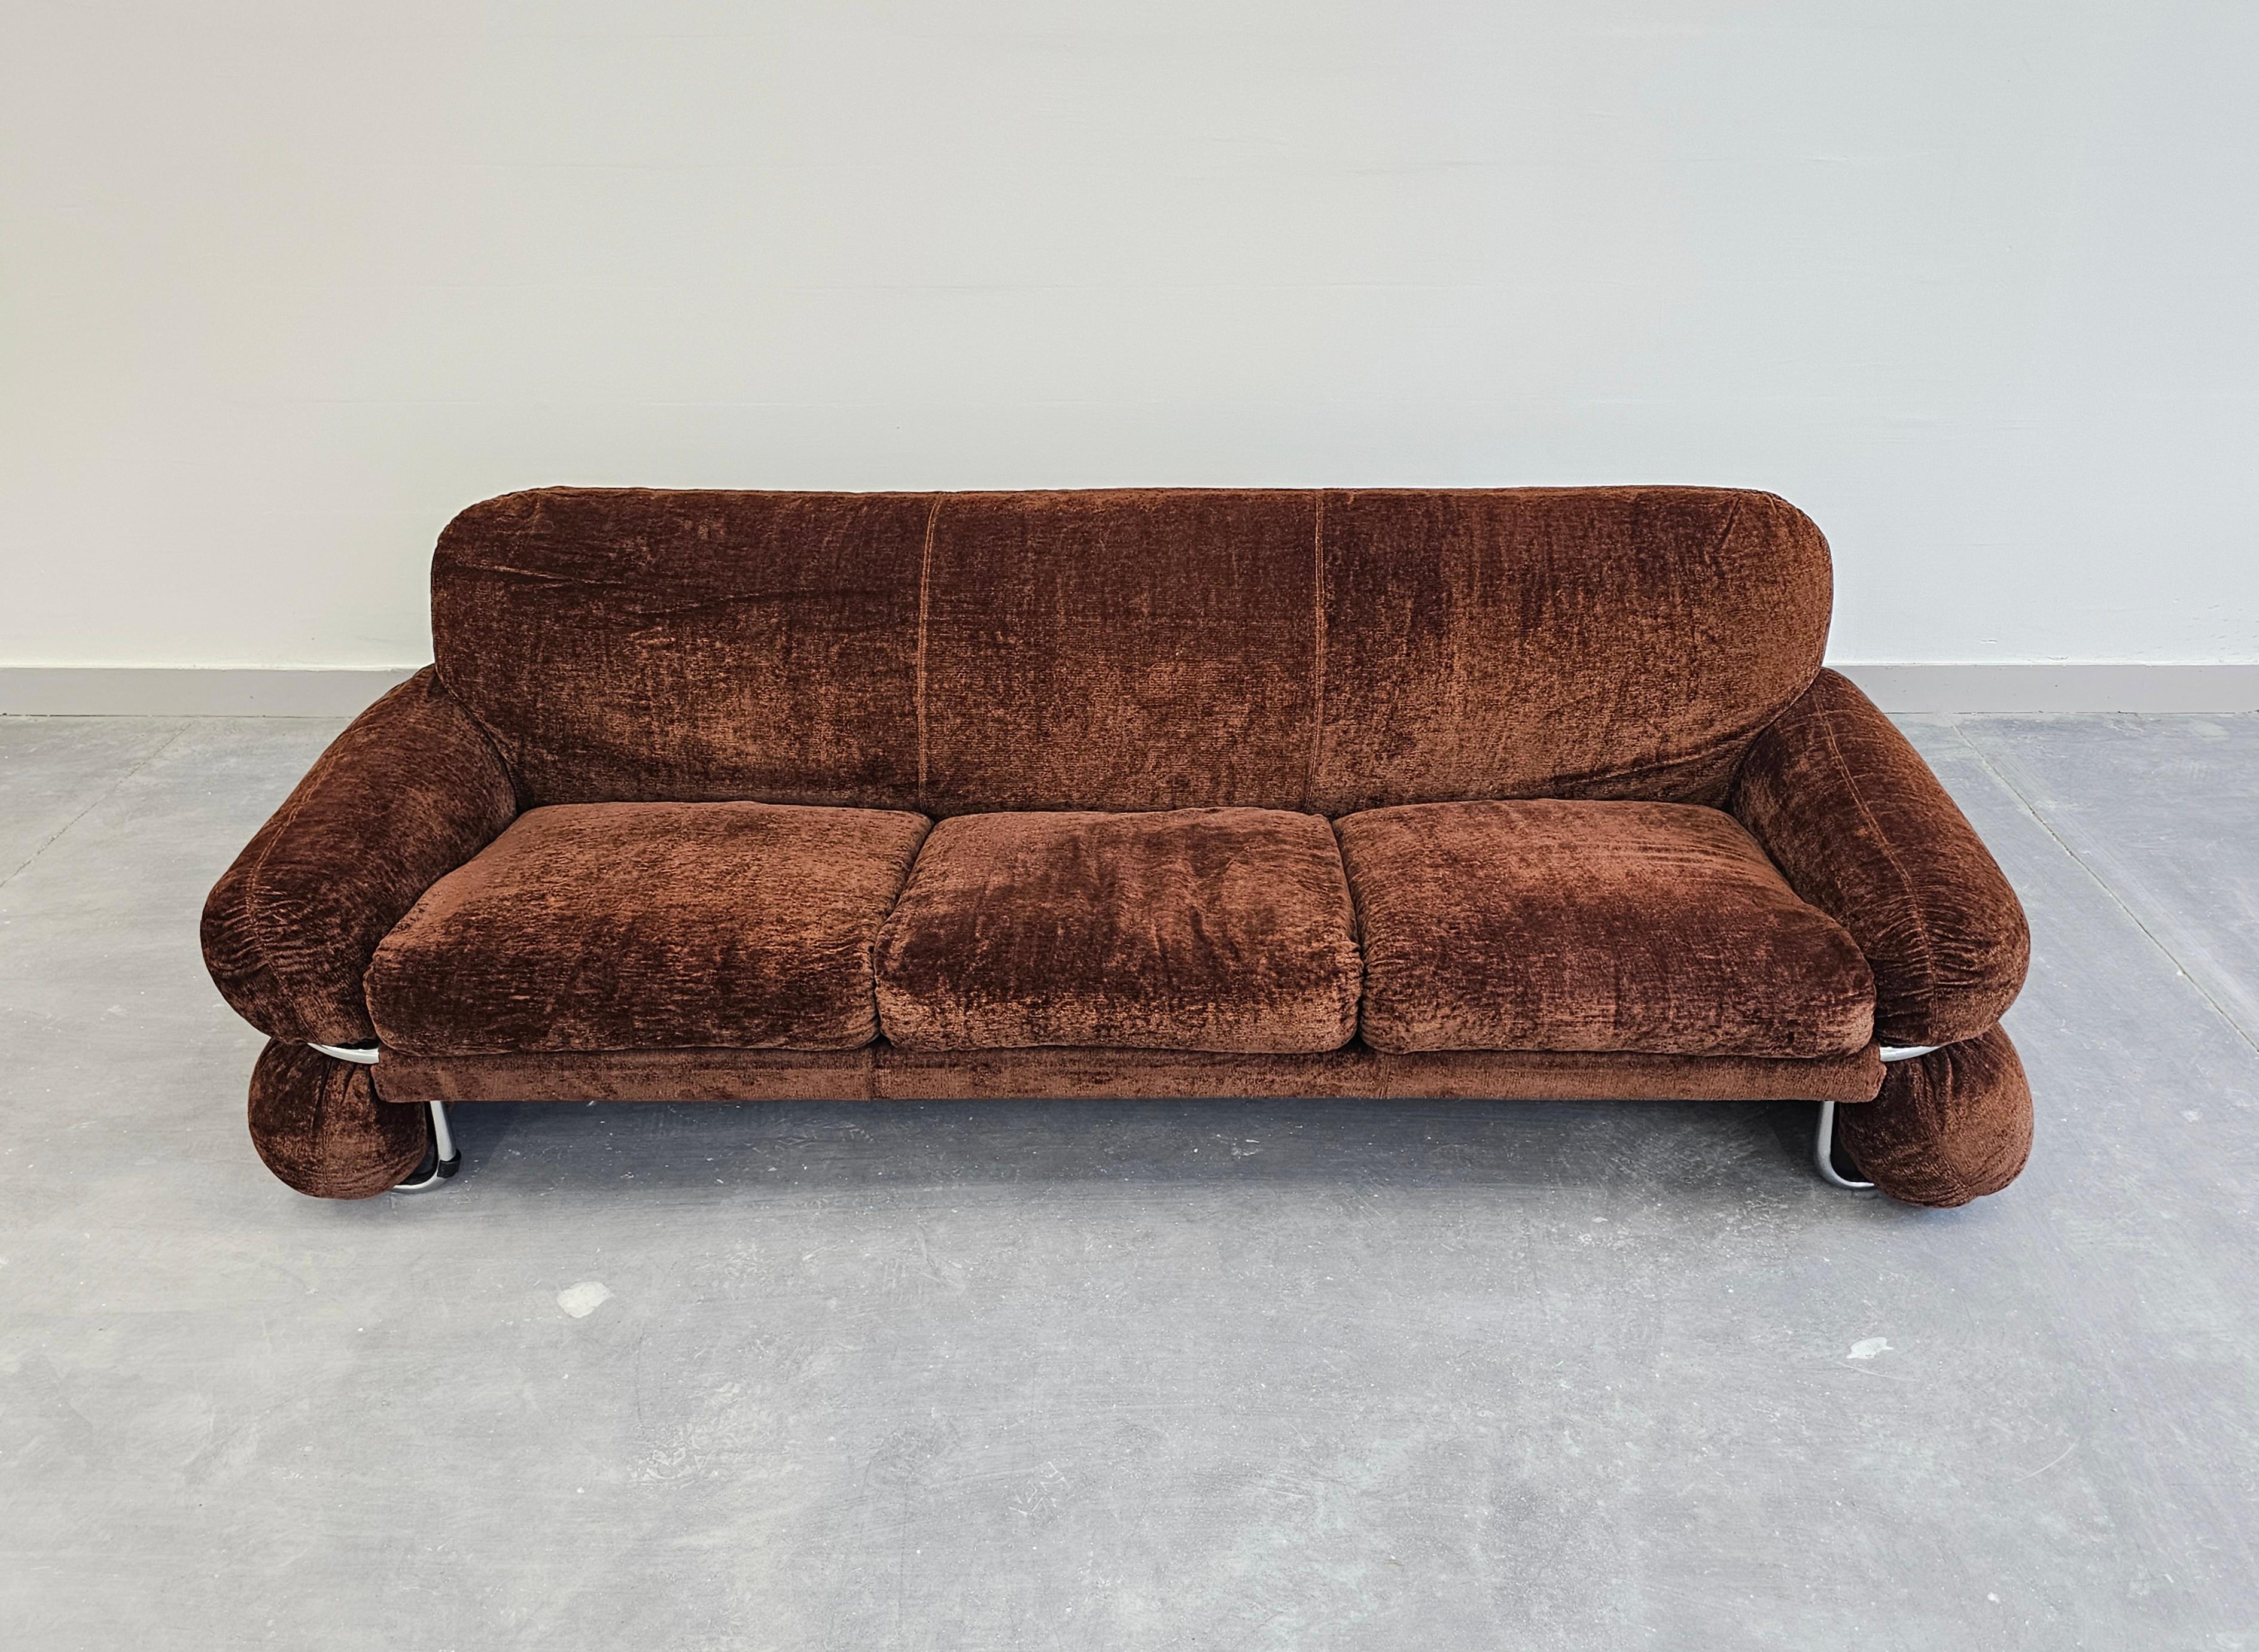 In this listing you will find a n exceptionally rare Space Age sofa with tubular frame. This original brown velvet Gianfranco Frattini style 3-seater sofa features stunning design and shape that will draw attention to itself wherever you decide to